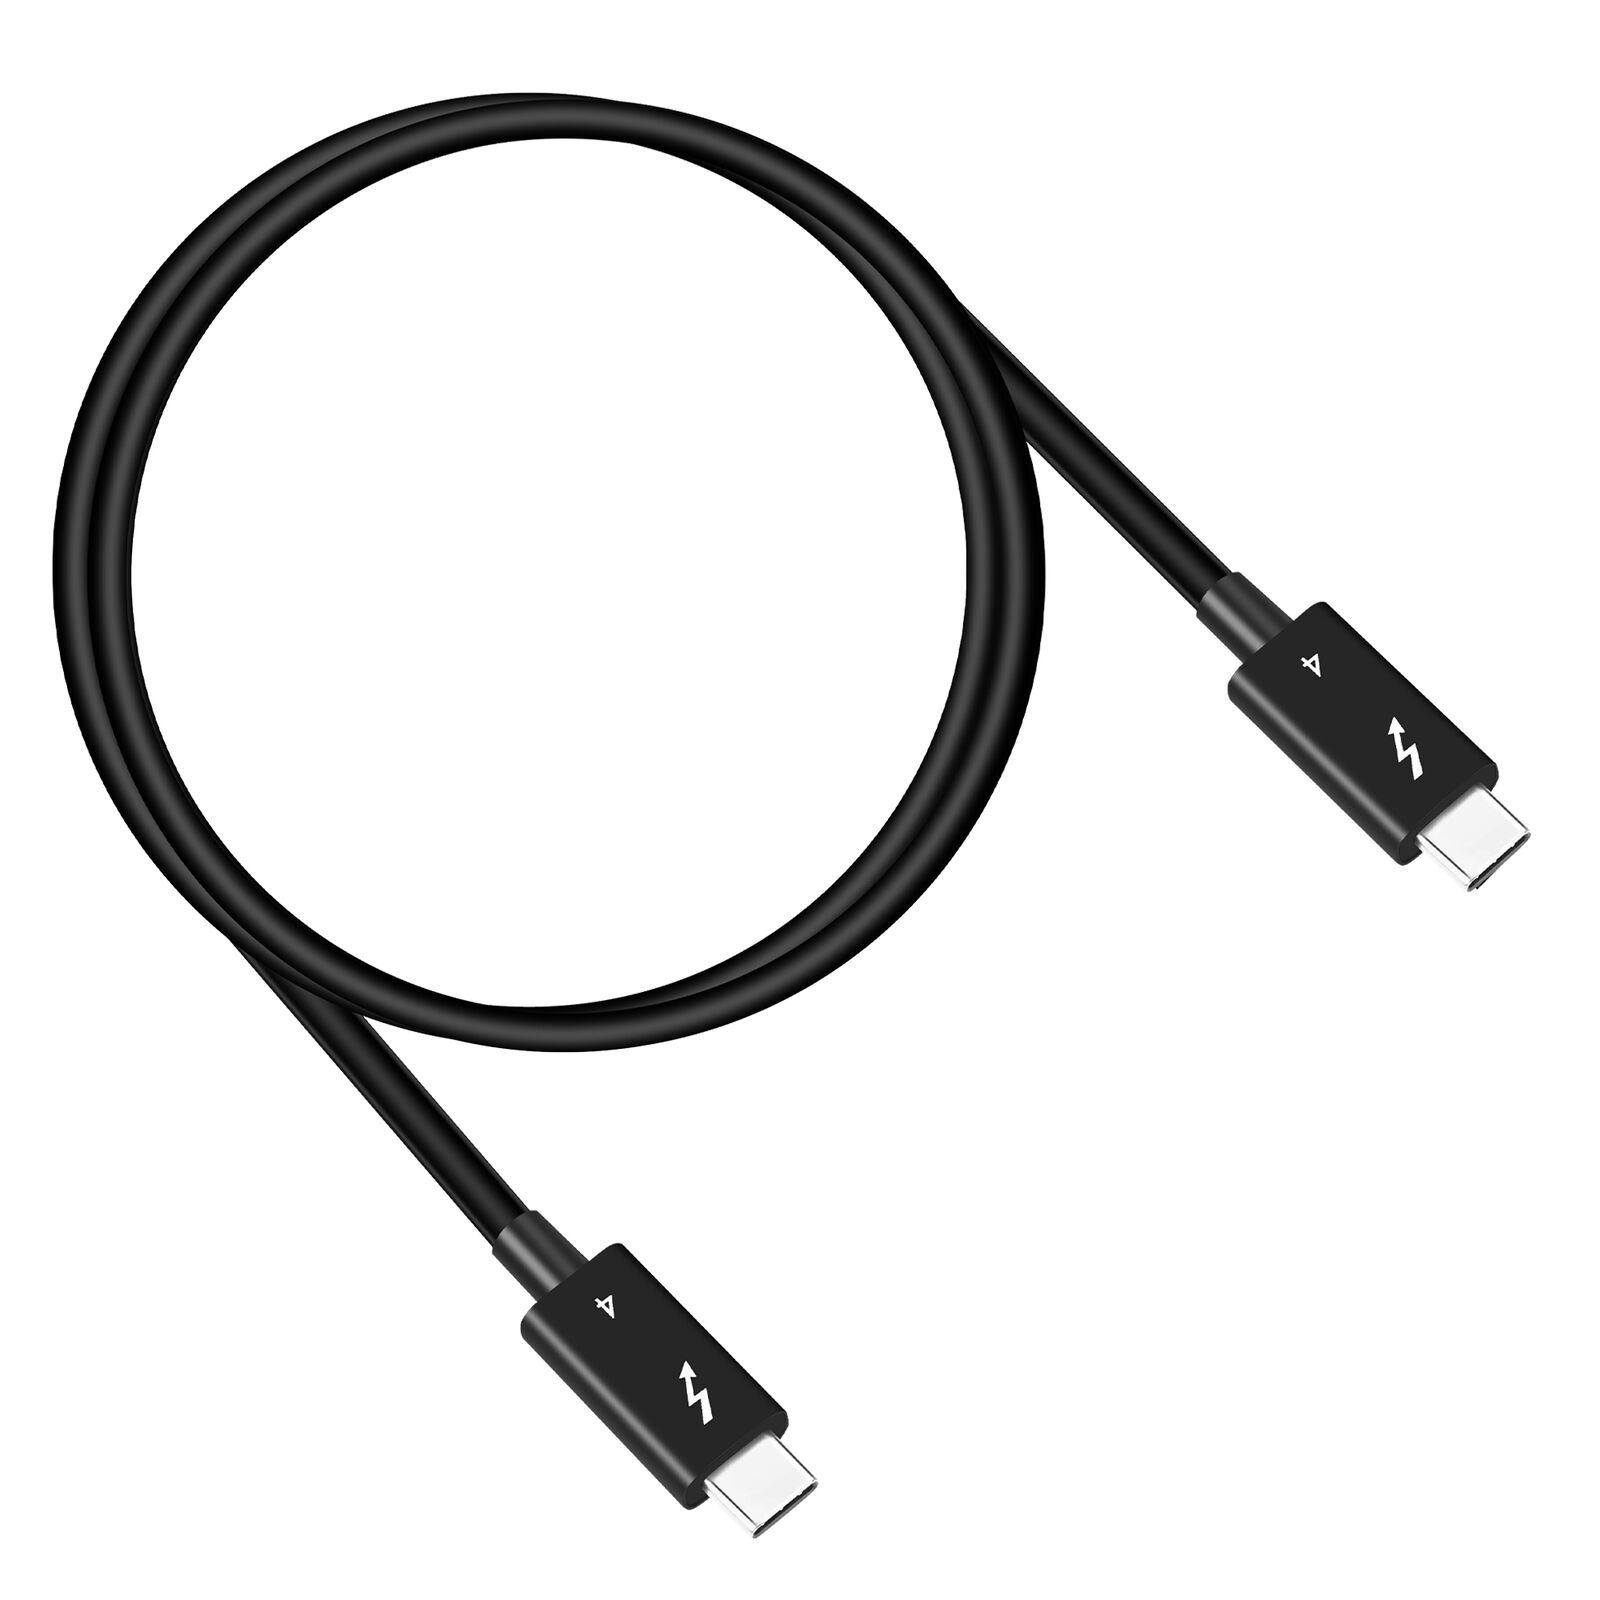 Thunderbolt 4 cable (0.8m) 40Gb/s 100W USB-C for Apple Thunderbolt 4 USB-C Cable